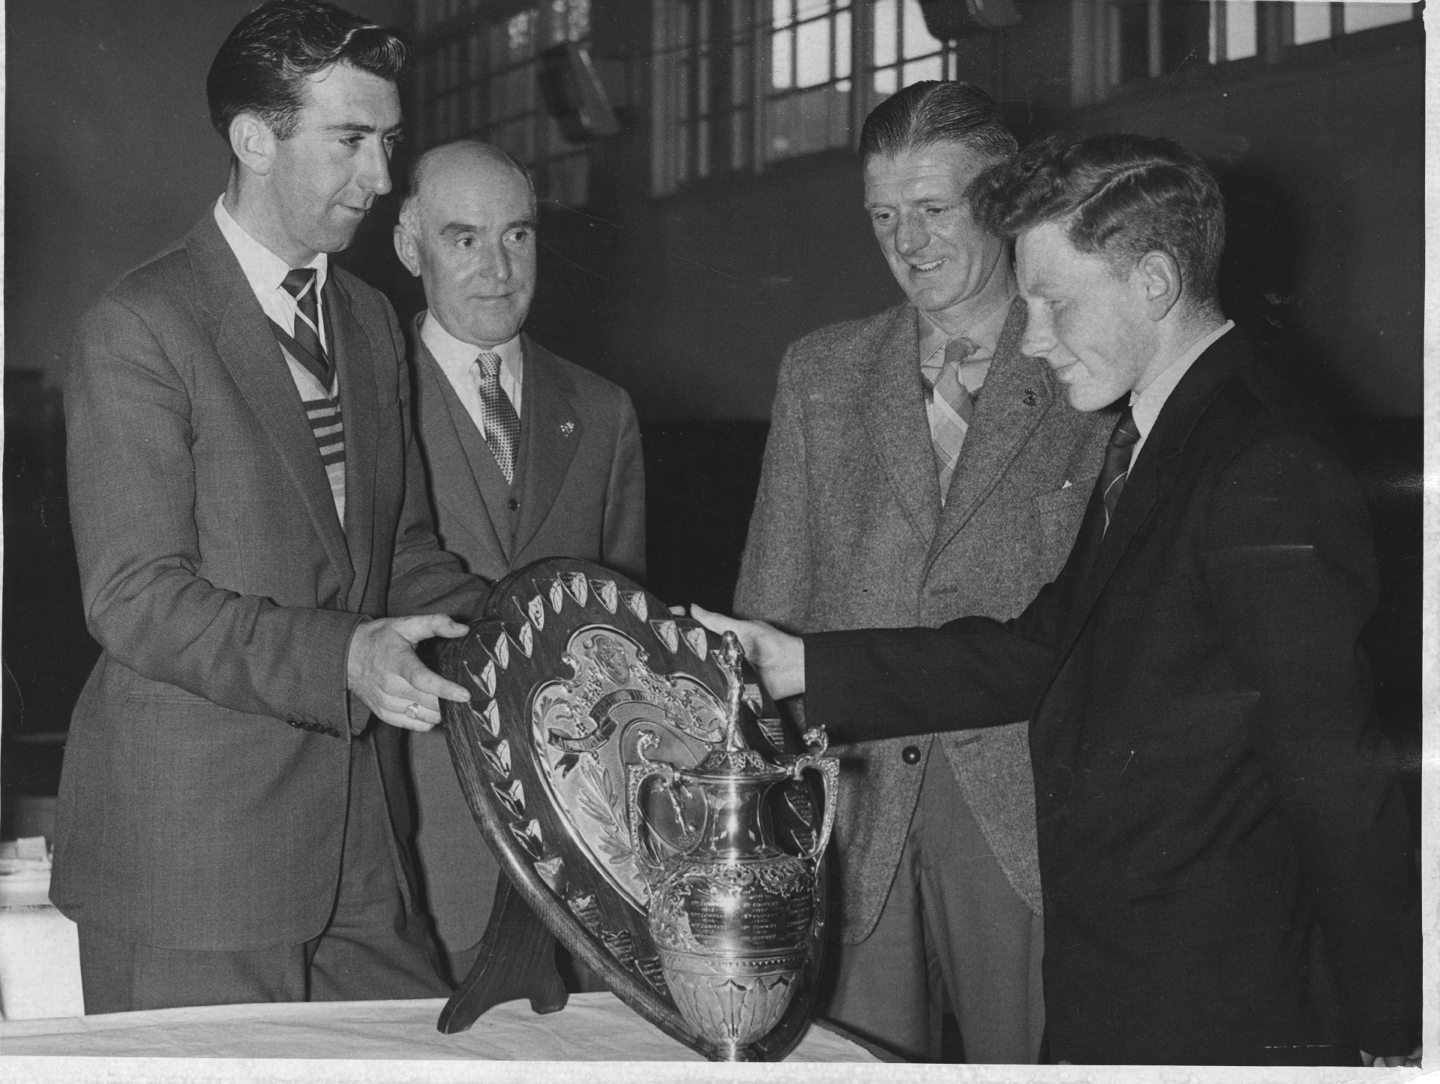 George Kelly presented Boys Brigade football trophies at the Aberdeen Battalion headquarters in 1958.